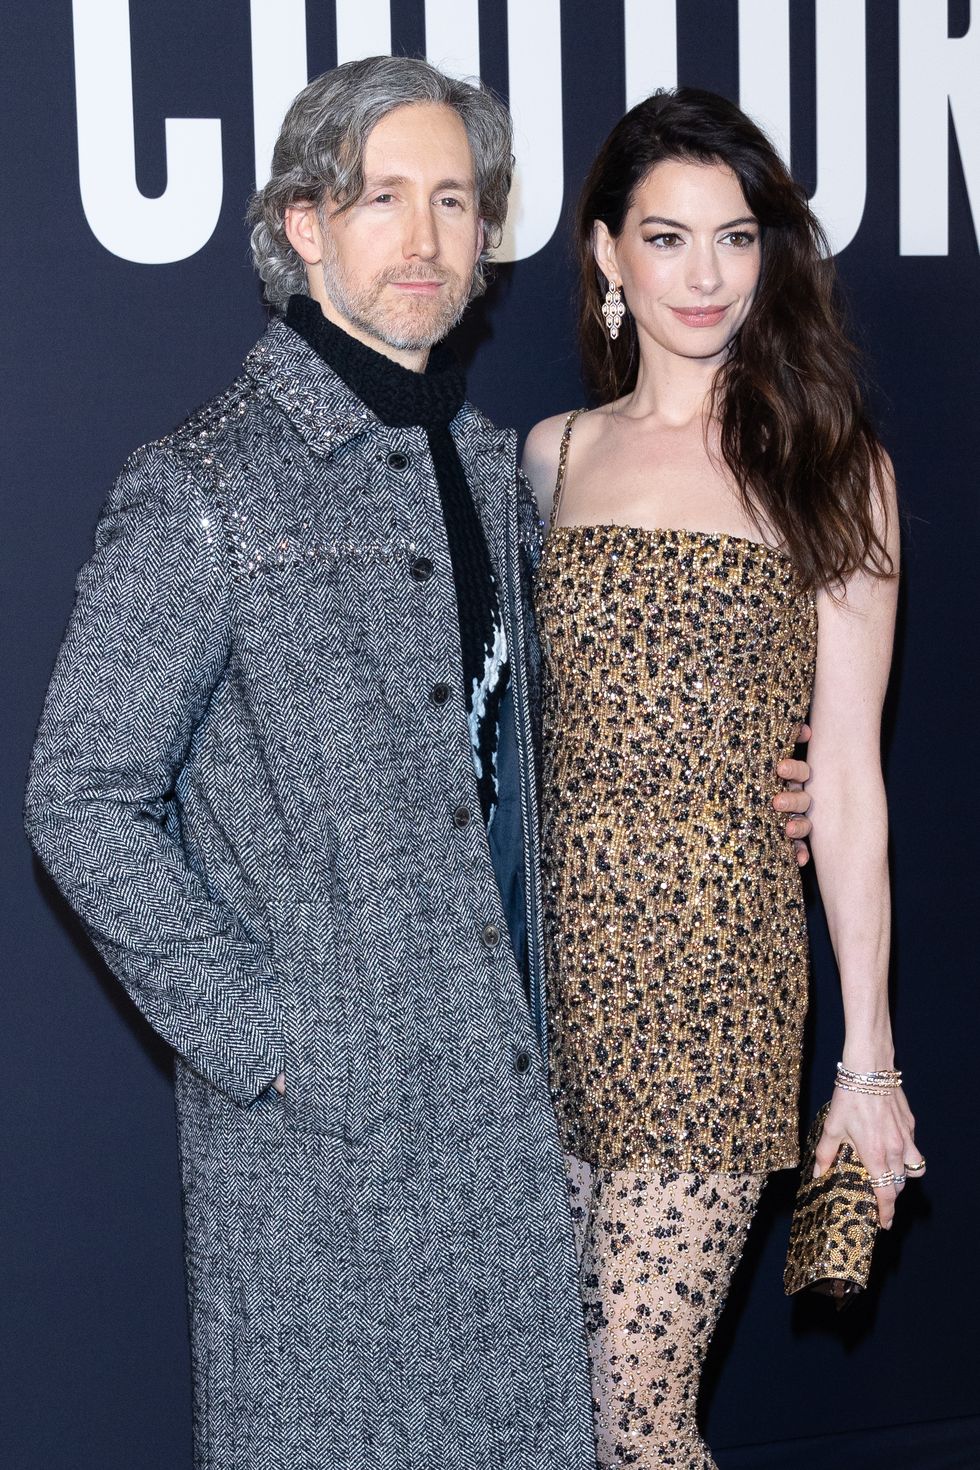 anne hathaway and adam shulman at the valentino haute couture photo call on january 25, 2023 in paris